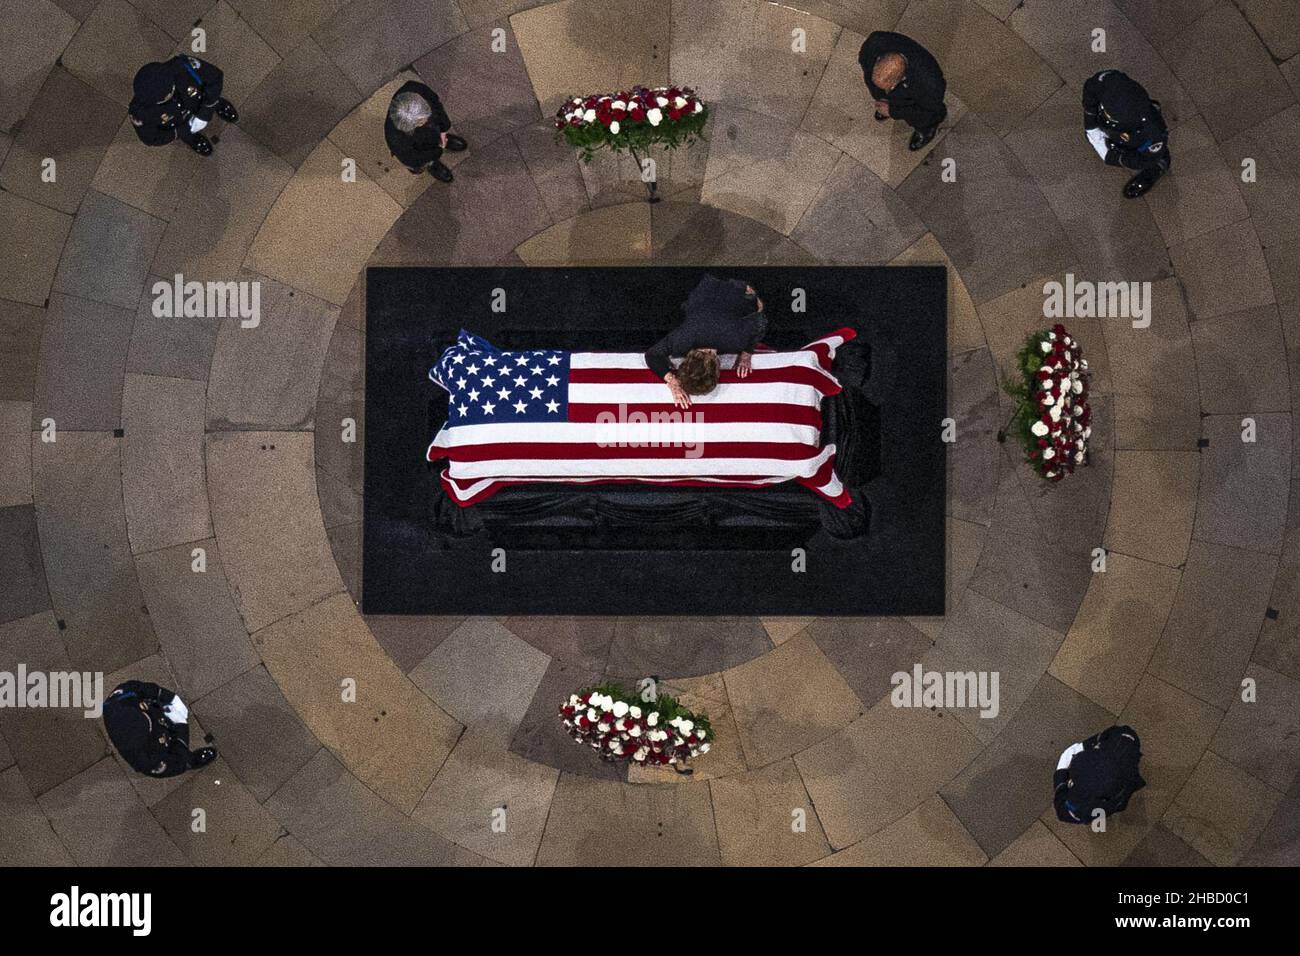 Washington, United States. 18th Dec, 2021. Elizabeth Dole lies across her husband's casket, former Senator Bob Dole (R-KS), as he lies in state during a Congressional memorial service in the Rotunda at the U.S. Capitol in Washington DC, on Thursday, December 9, 2021. Dole, who served on Capitol Hill for 36 years, died in his sleep on December 5 at the age of 98. Pool photo by Andrew Harnik/UPI Credit: UPI/Alamy Live News Stock Photo